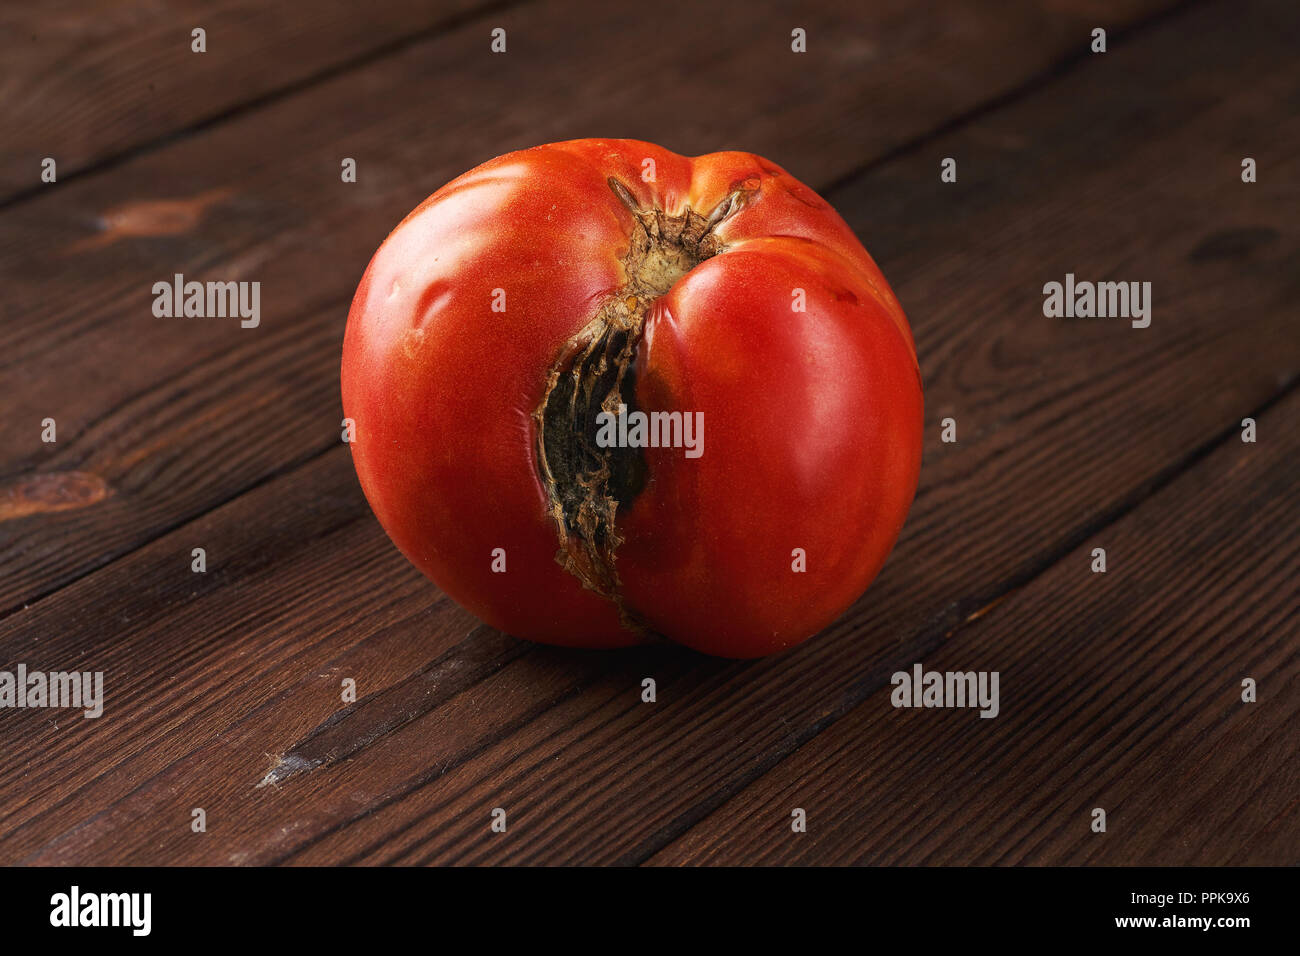 Spoiled, rotten red tomatoon a dark wooden background. Stock Photo